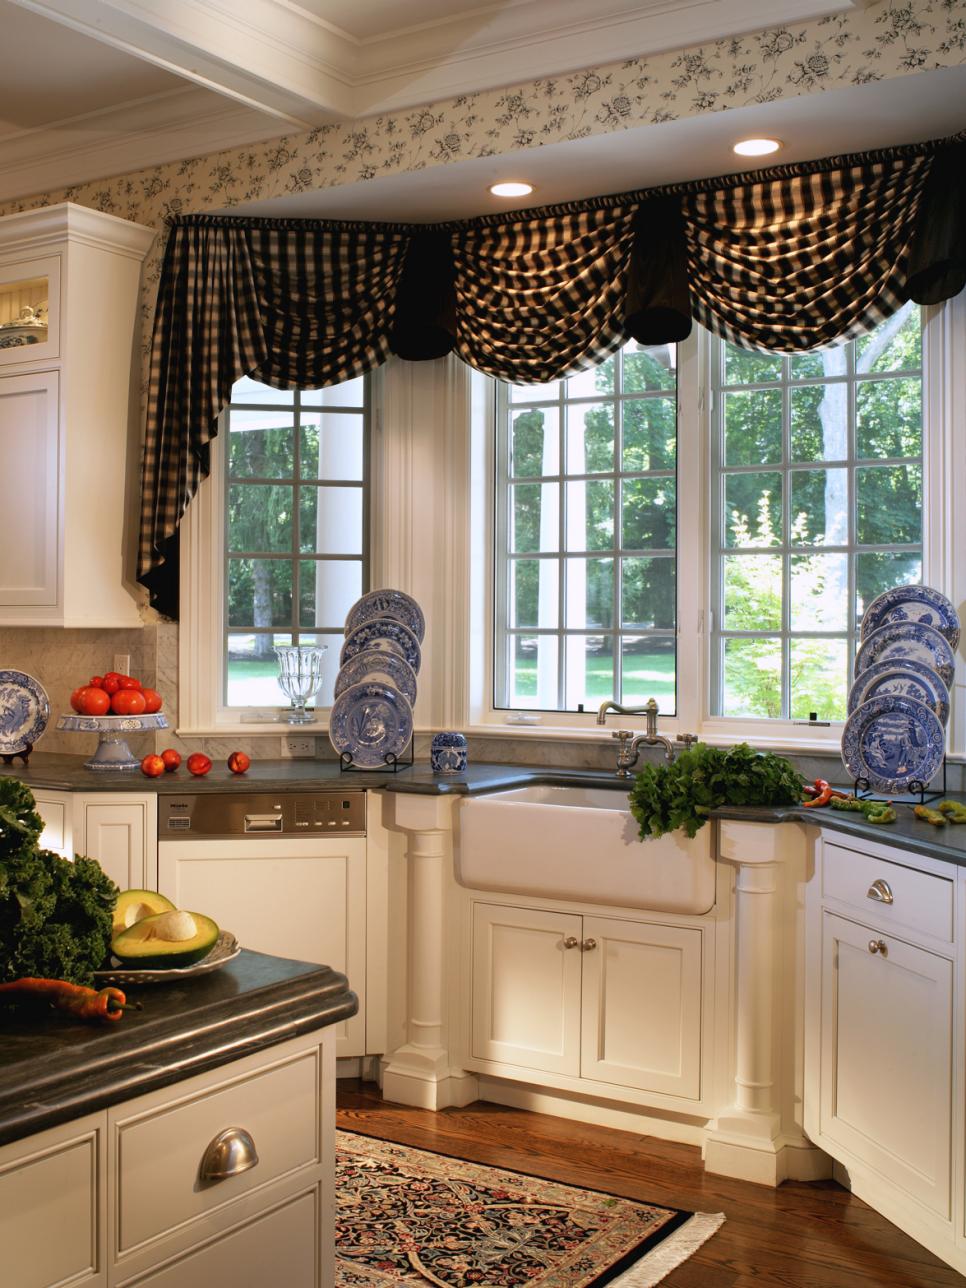 Black and White Kitchen With Valance, Apron Sink, Plate Display